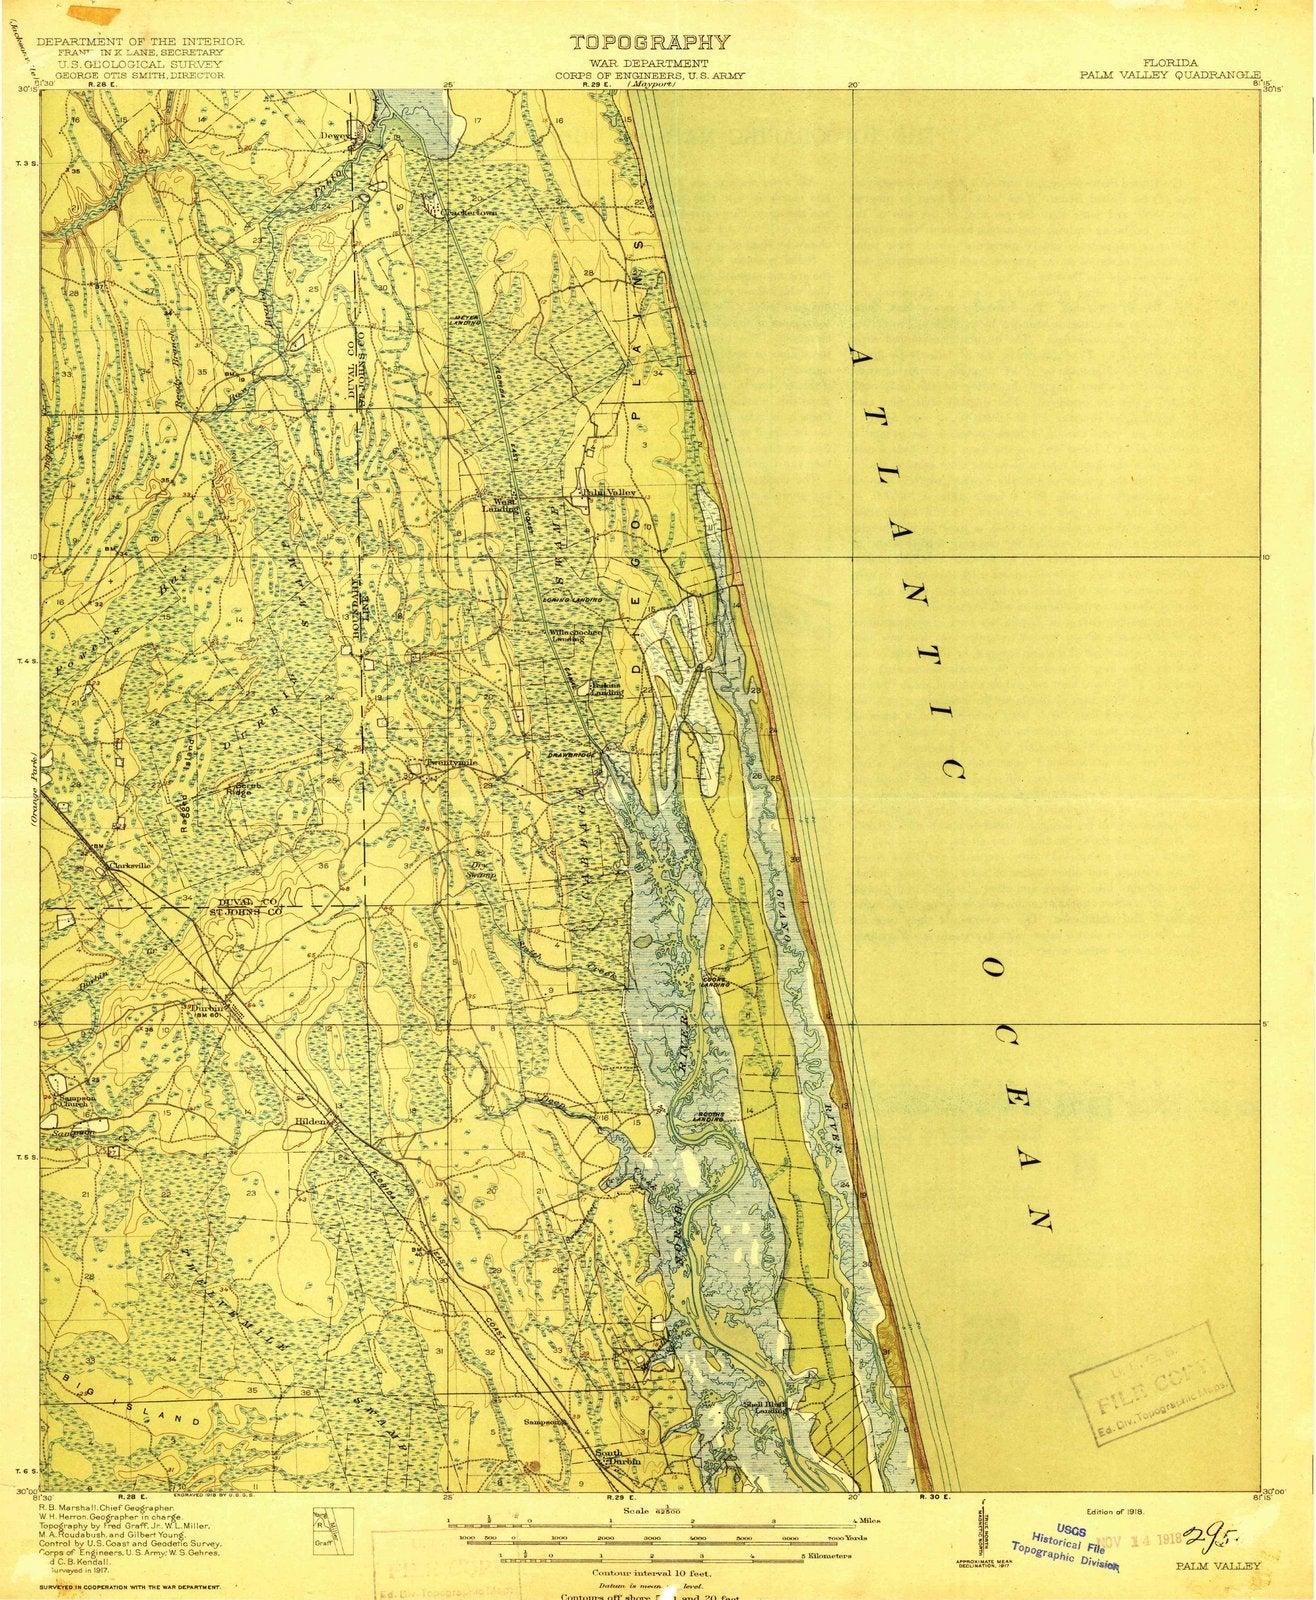 1918 Palm Valley, FL - Florida - USGS Topographic Map